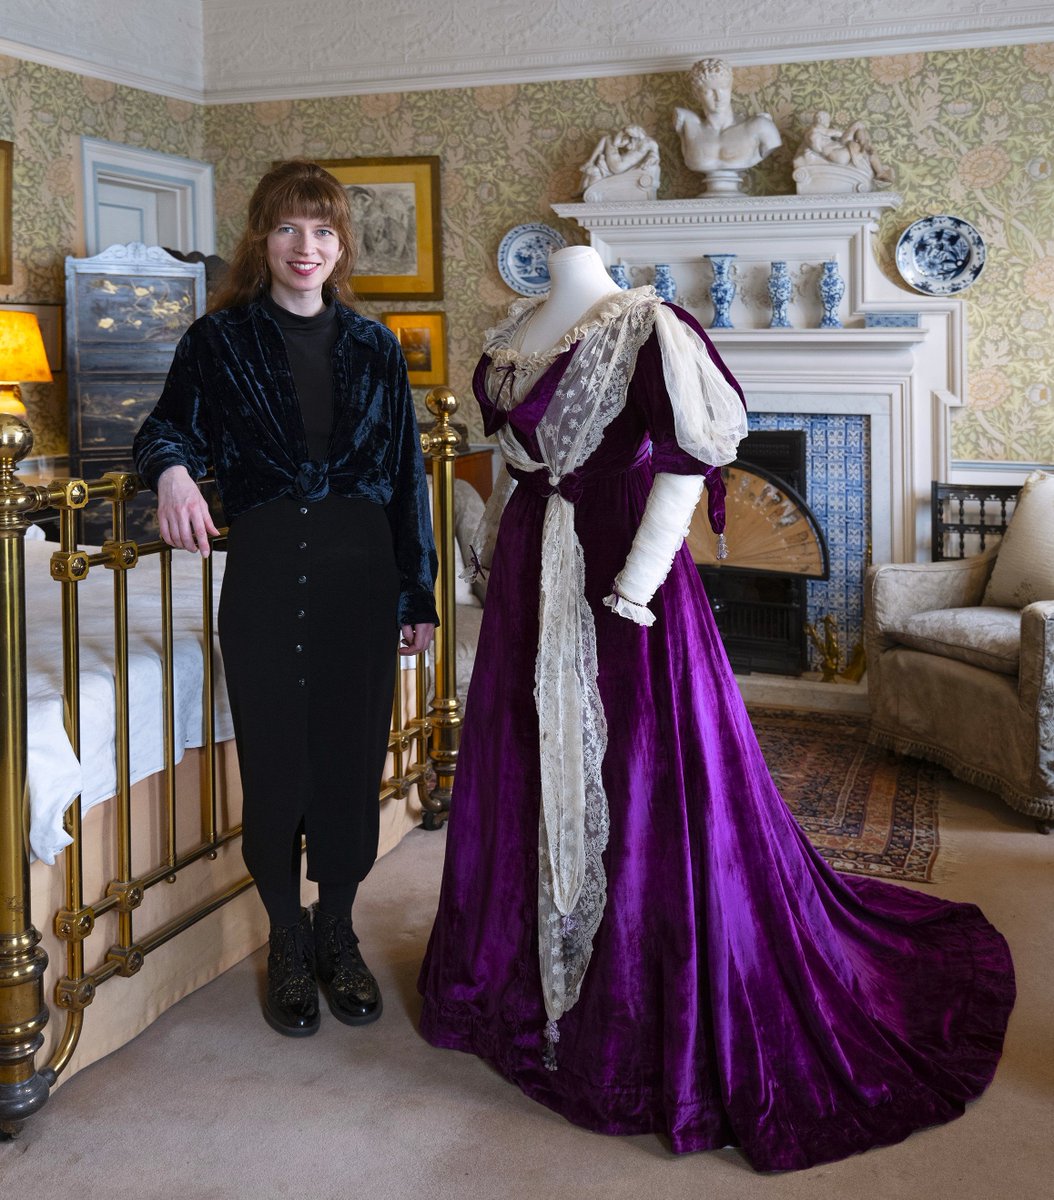 Speaking live on BBC Radio London @RobertElms this past weekend, hear Leighton House and Sambourne House Curator, Hannah Lund, chat all things #OutShopping 🎙️ Listen now (1:41-1:48) buff.ly/3U9TDwc